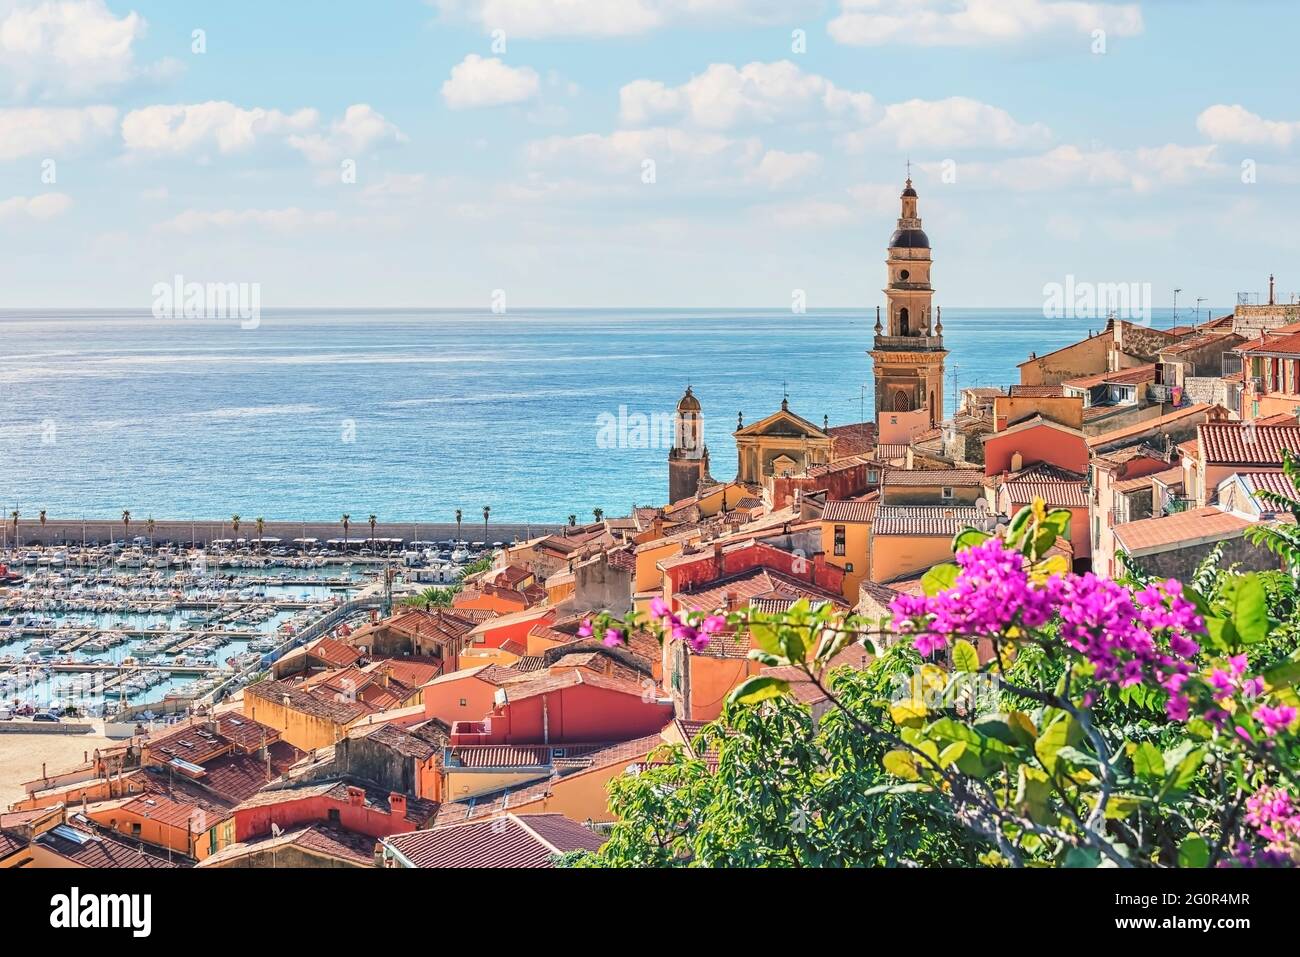 The city of Menton on the French Riviera Stock Photo